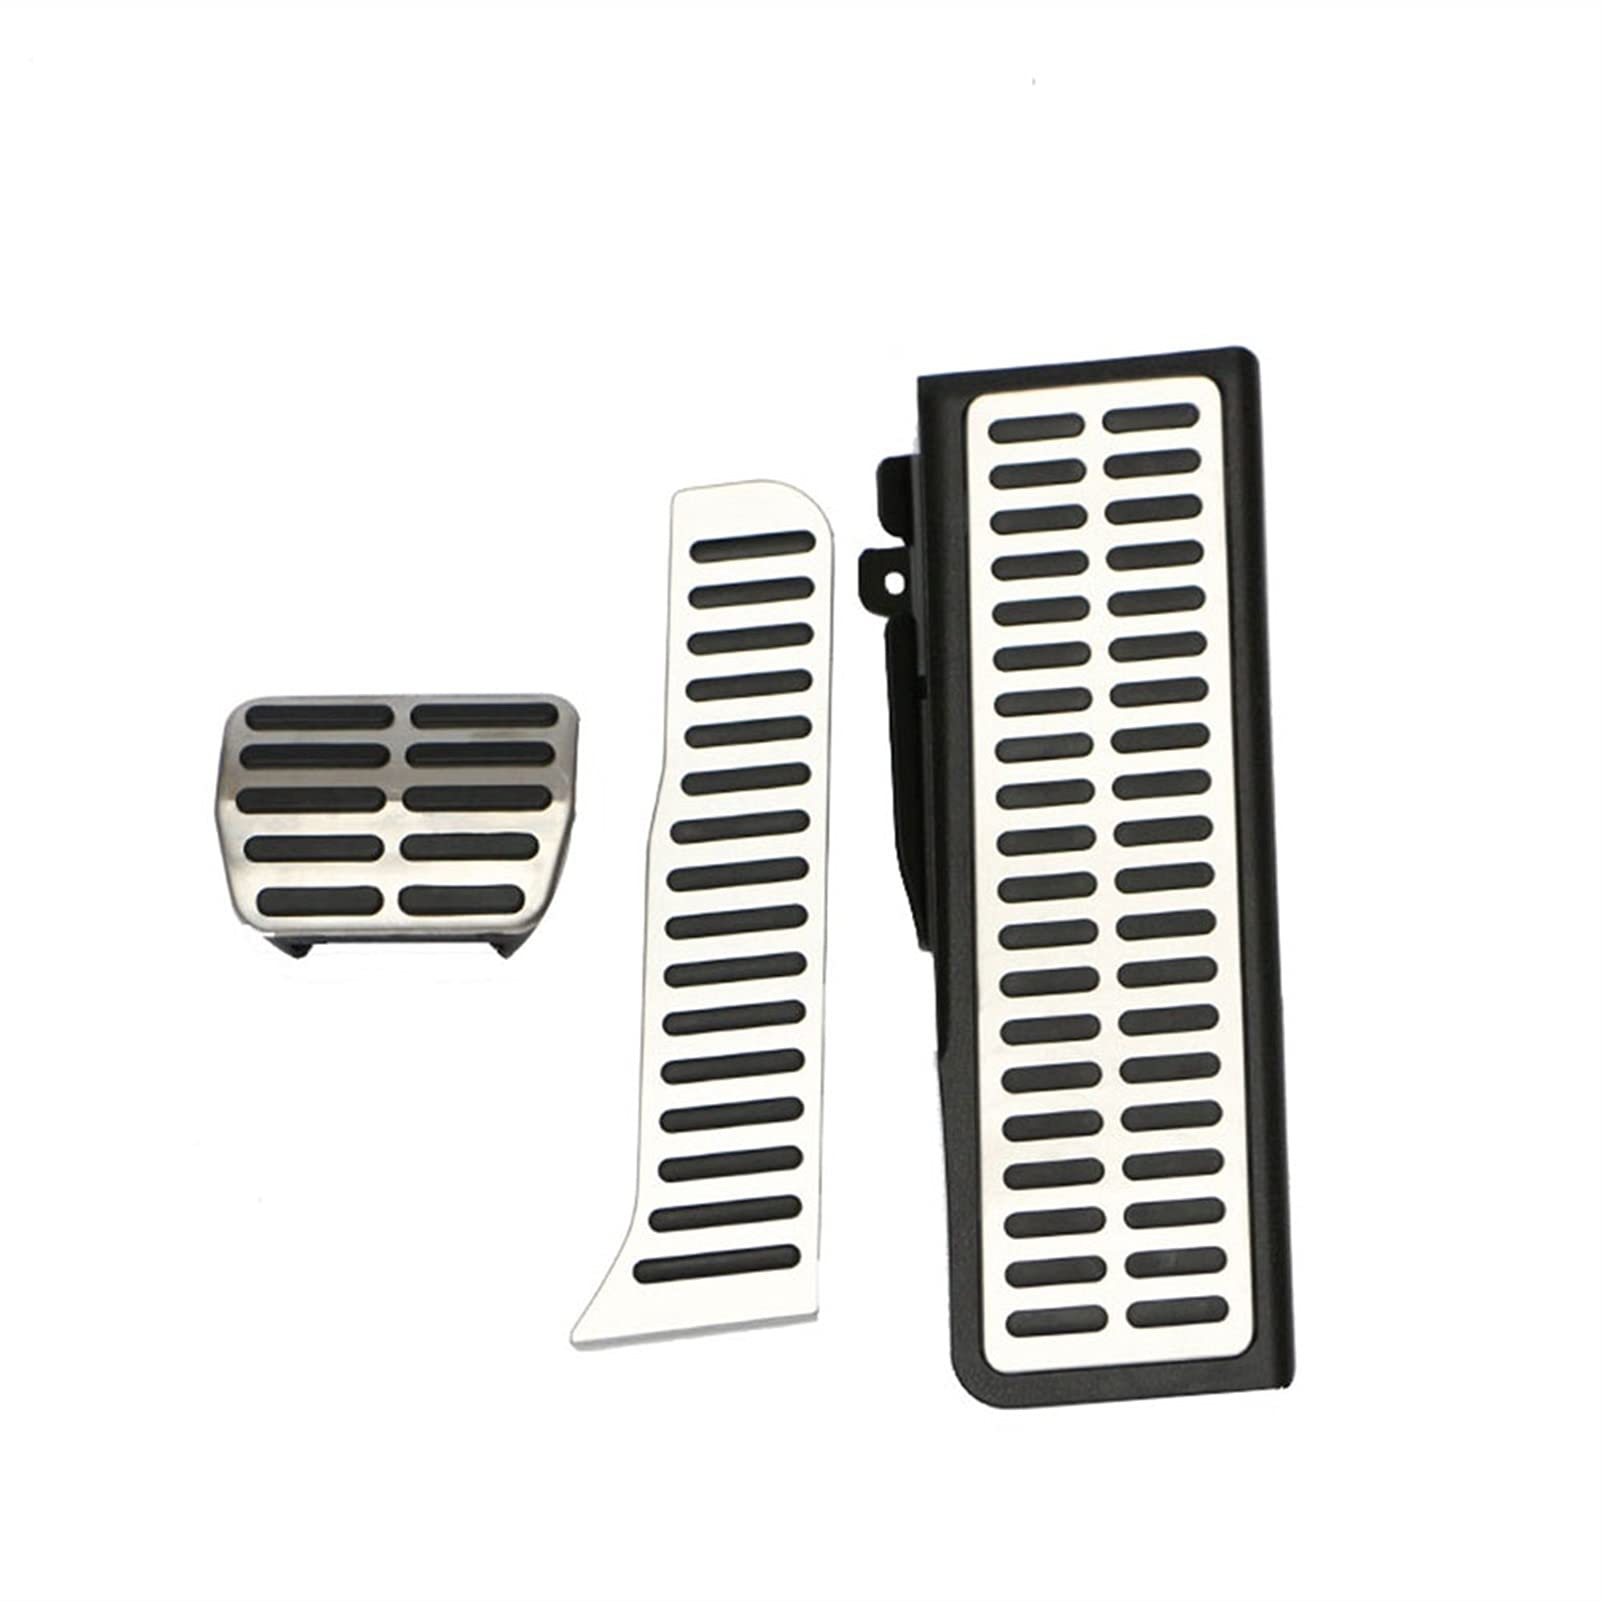 SZDGJ Auto-Pedal-Pedal-Abdeckung, for VW, for Golf 5 6 GTI, for Jetta MK5 CC, for Passat B6, for Tiguan Touareg, for Skoda, for Octavia, Zubehör Bremspedale(3Pcs AT With Rest) von SZDGJ